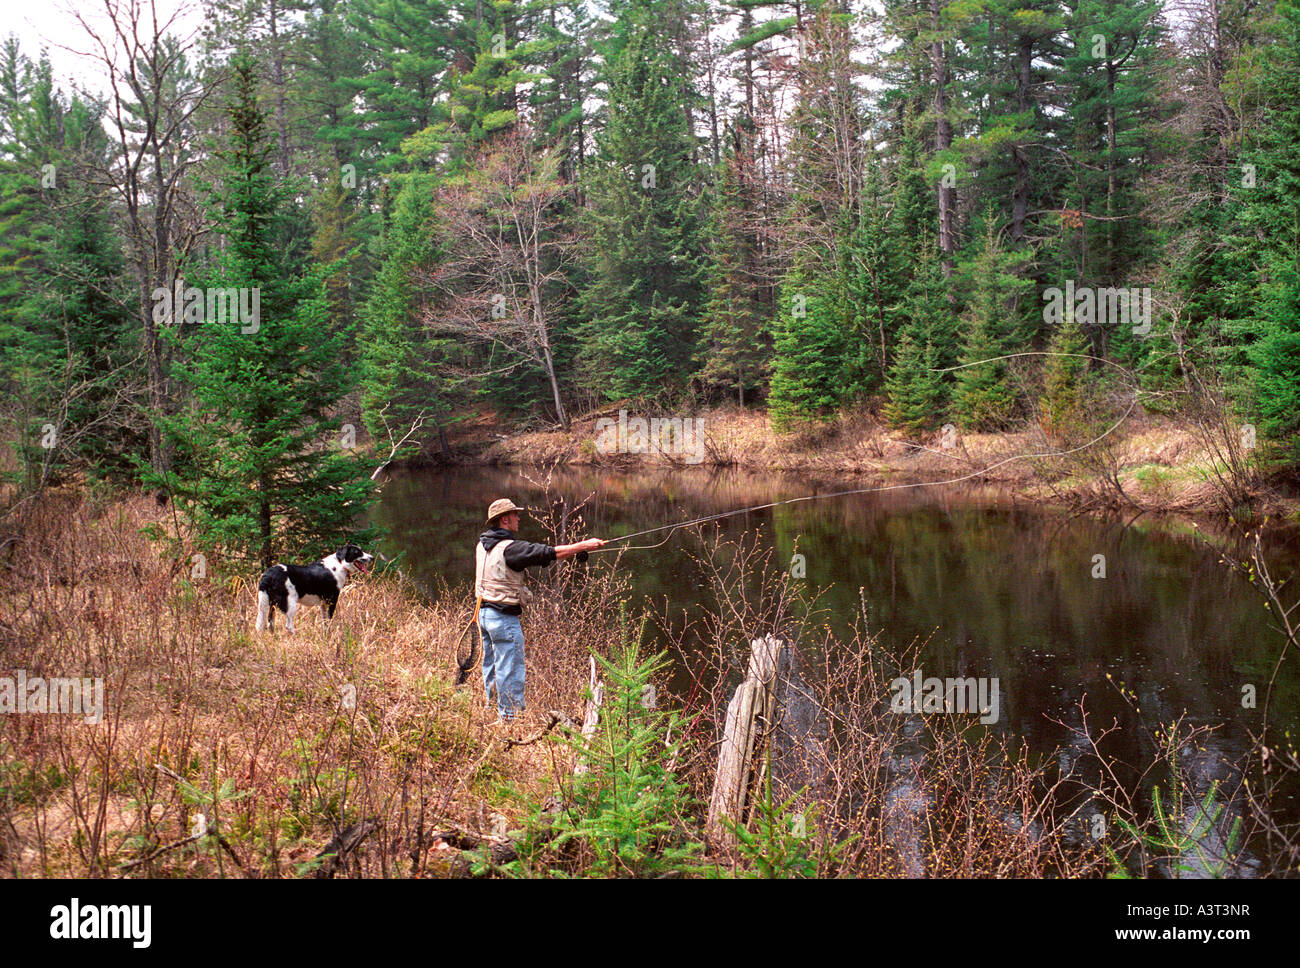 A MAN FLY FISHES WITH HIS DOG ON THE EAST BRANCH OF THE ESCANABA RIVER NEAR GWINN MICHIGAN Stock Photo